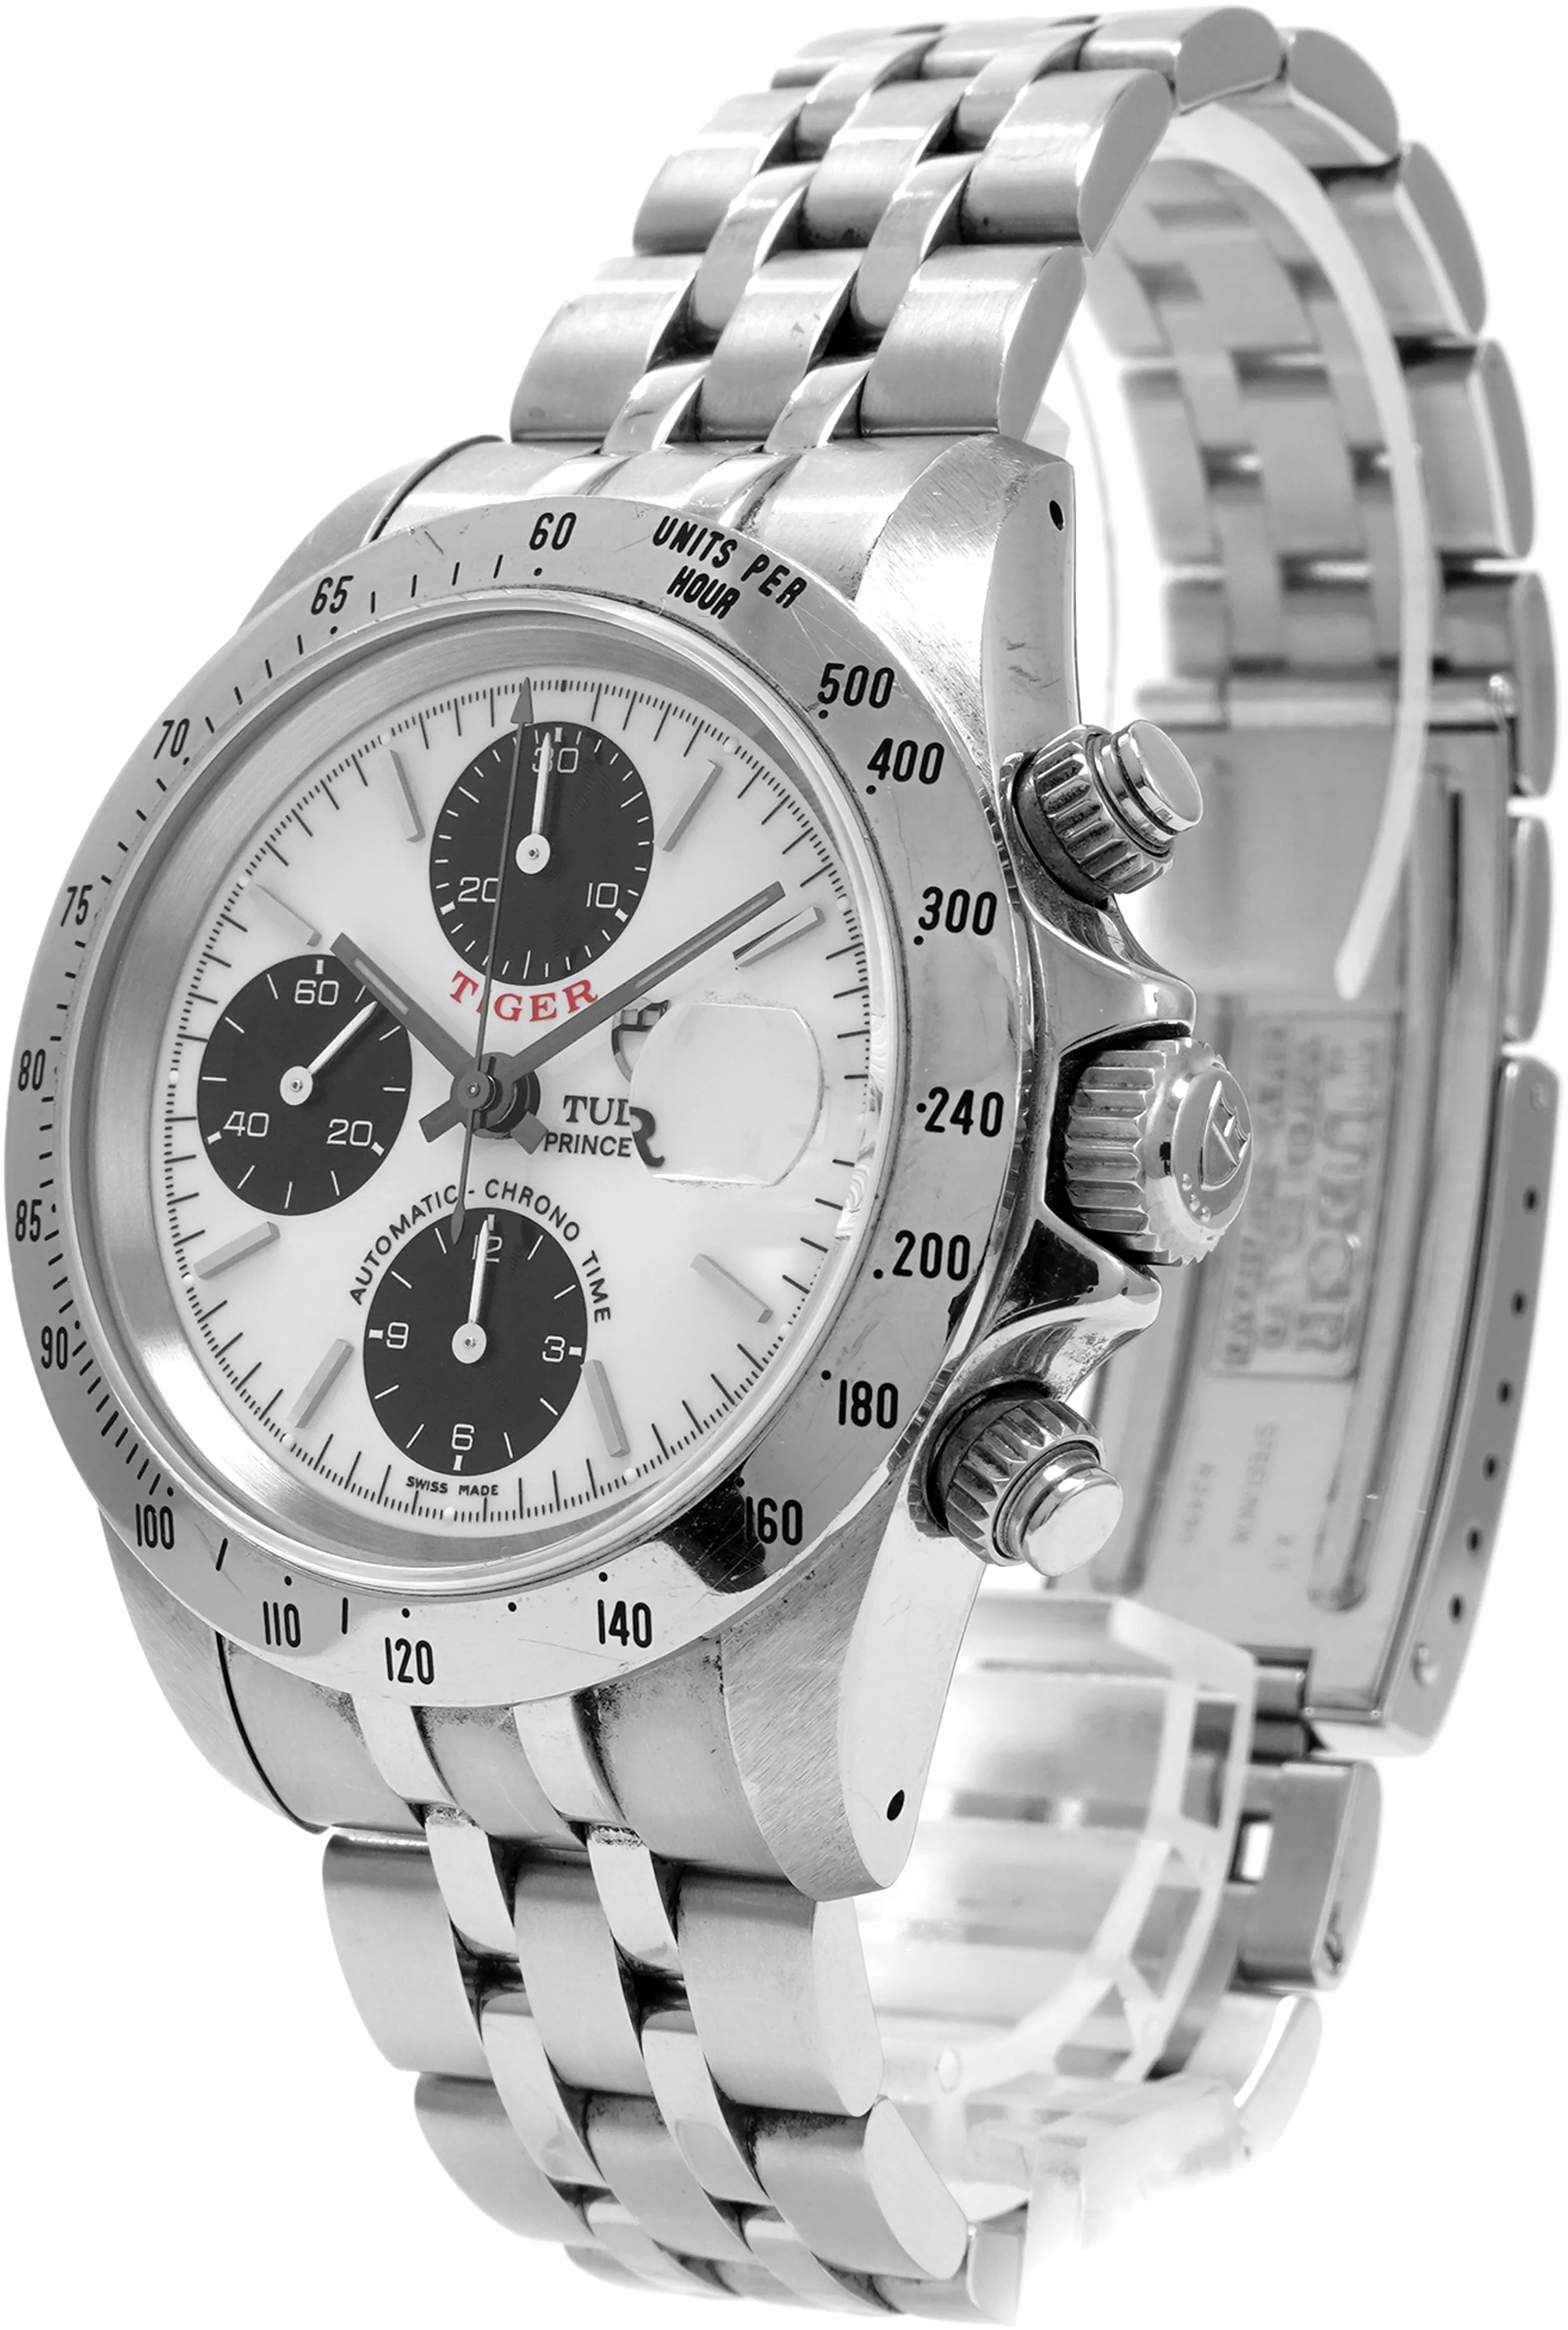 Tudor Tiger Prince Date 79280 40mm Stainless steel 1